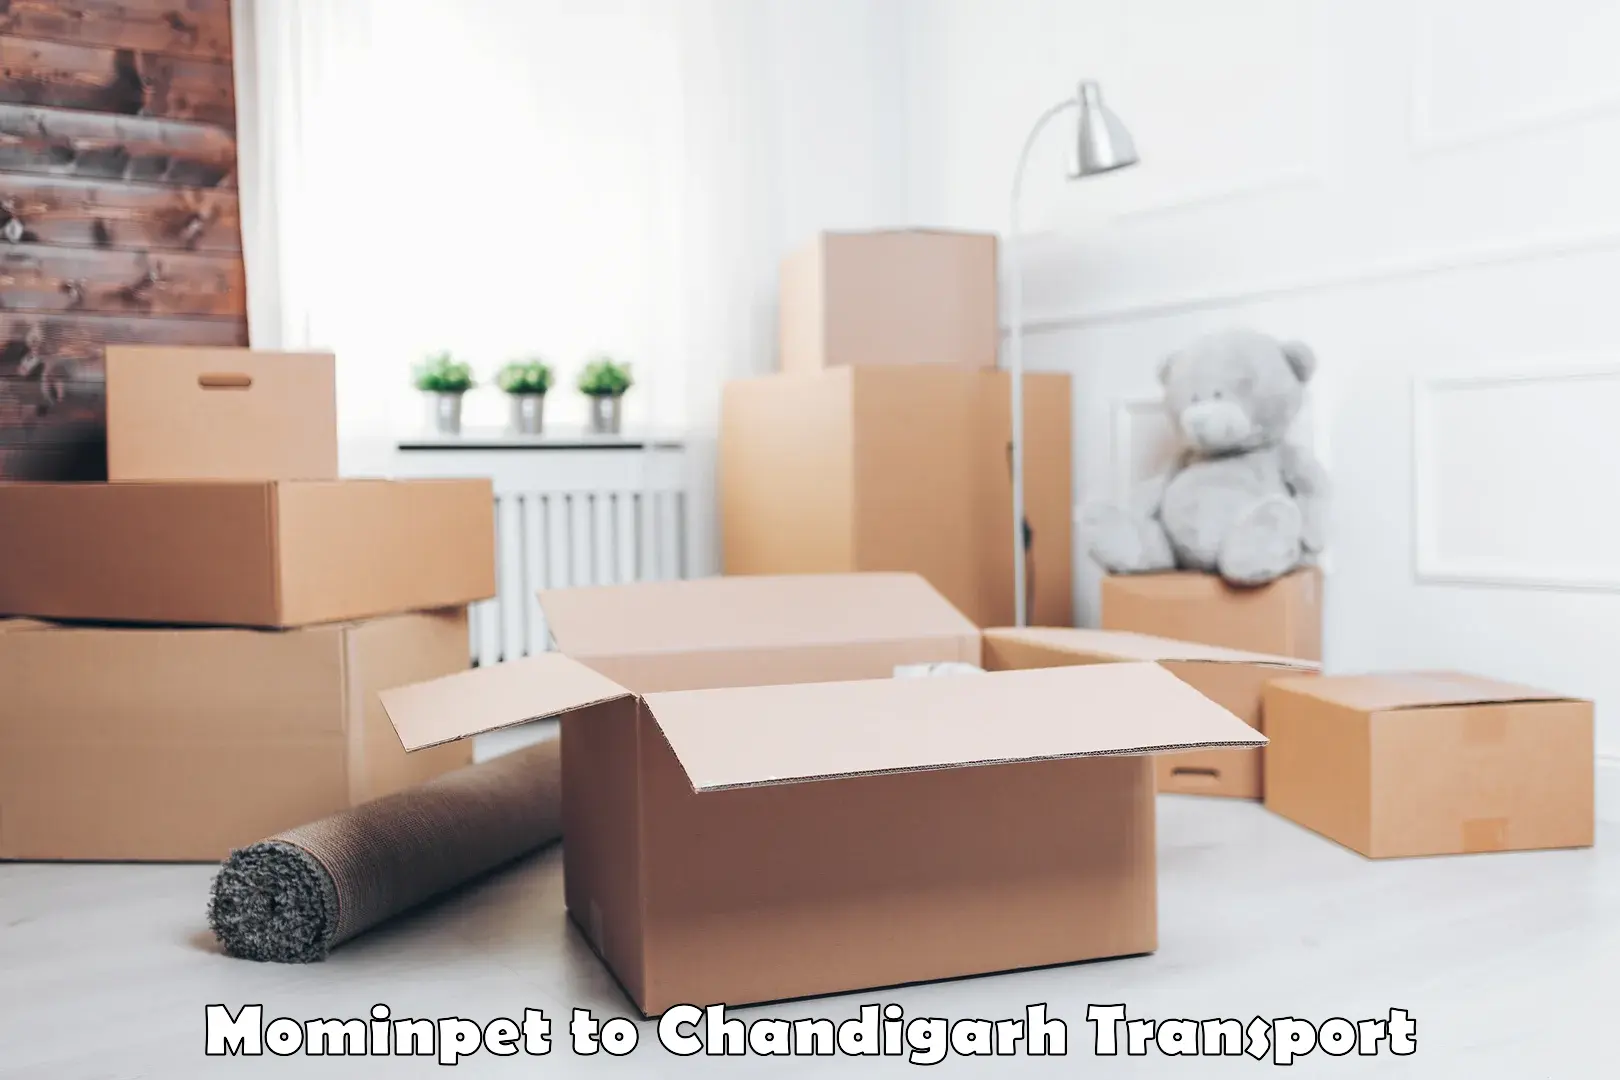 Lorry transport service Mominpet to Chandigarh